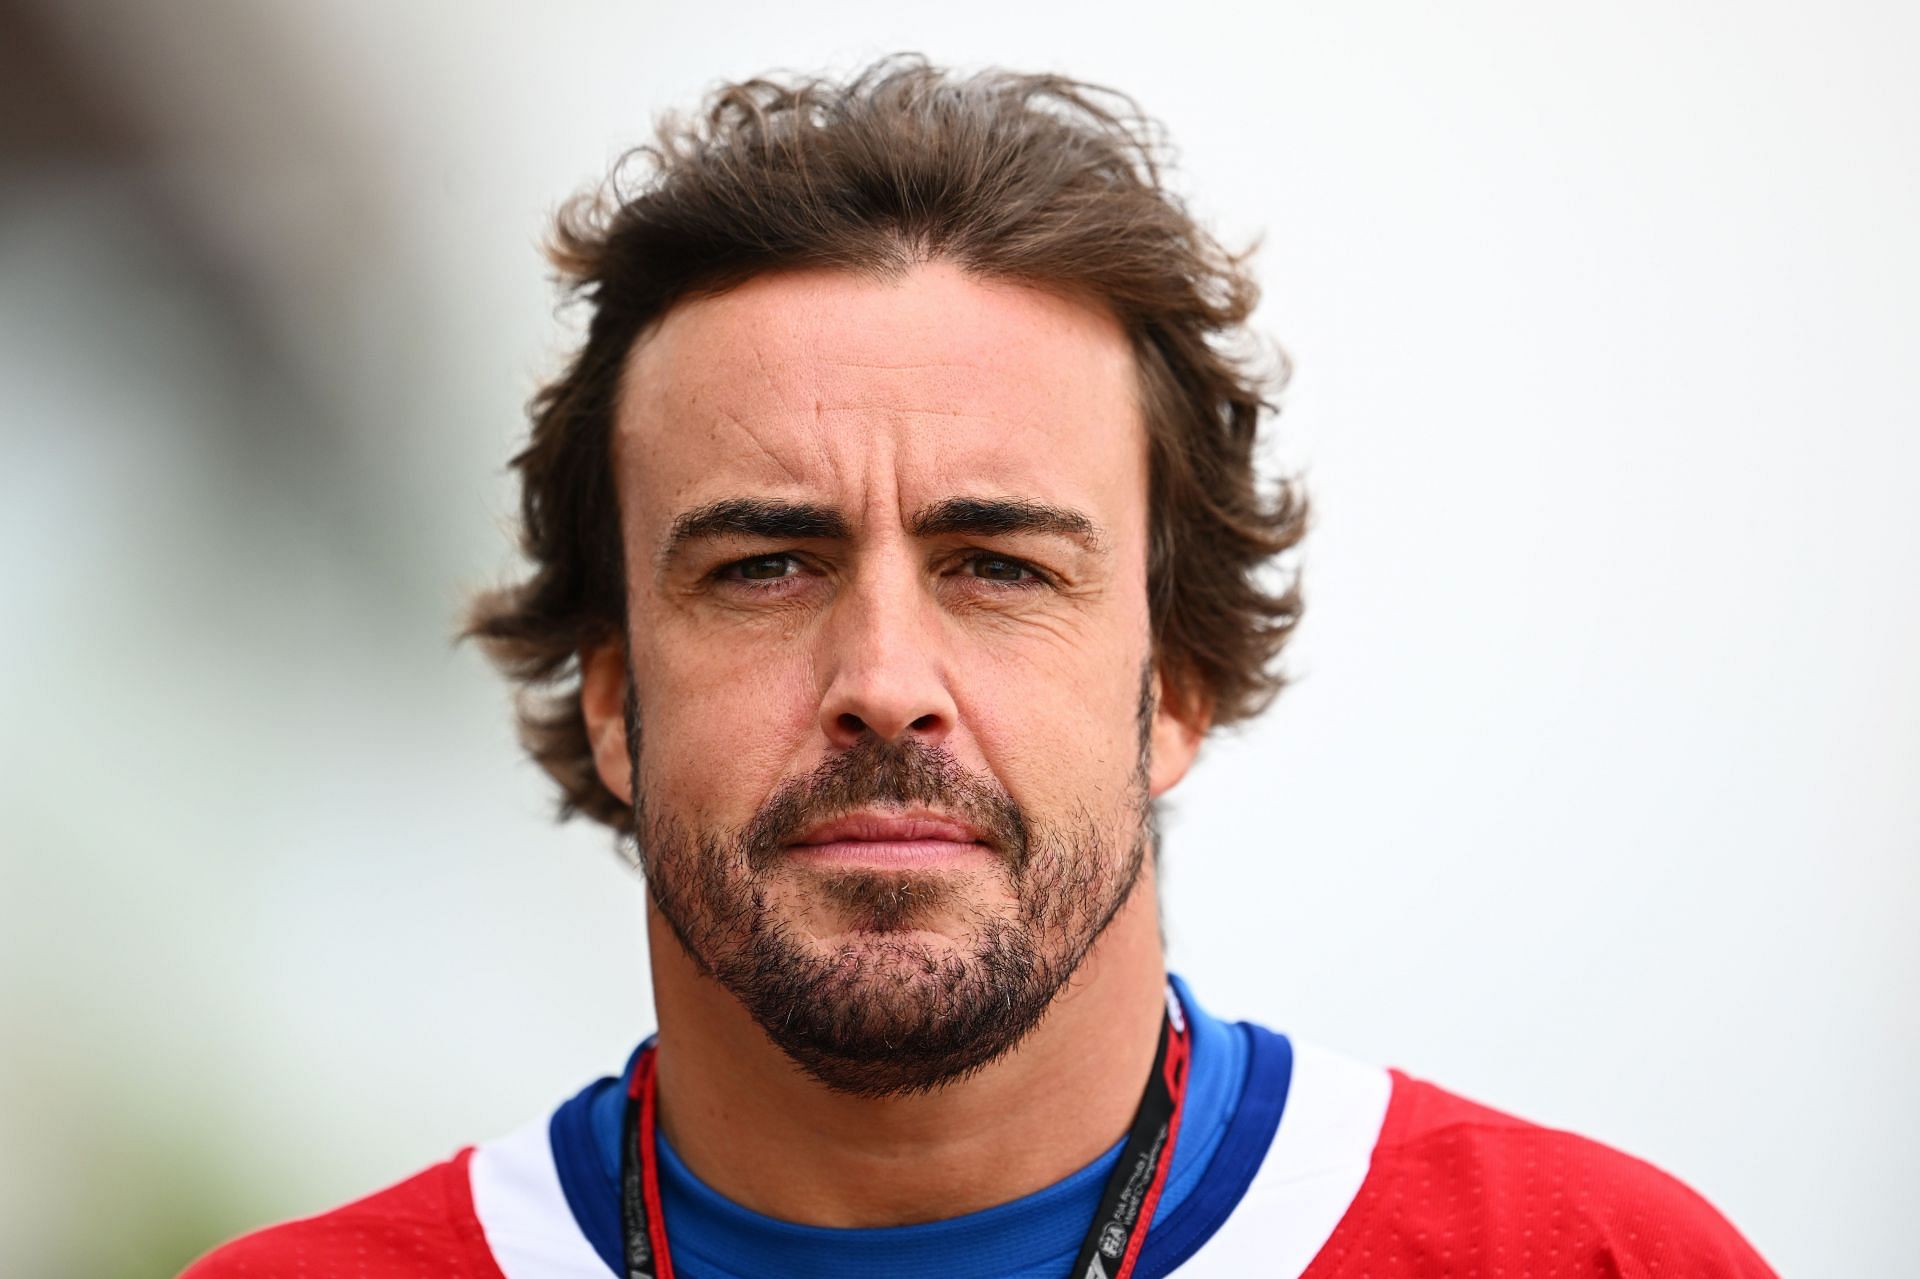 Fernando Alonso doubts F1 would be able to find a compromise between teams over porpoising rule change